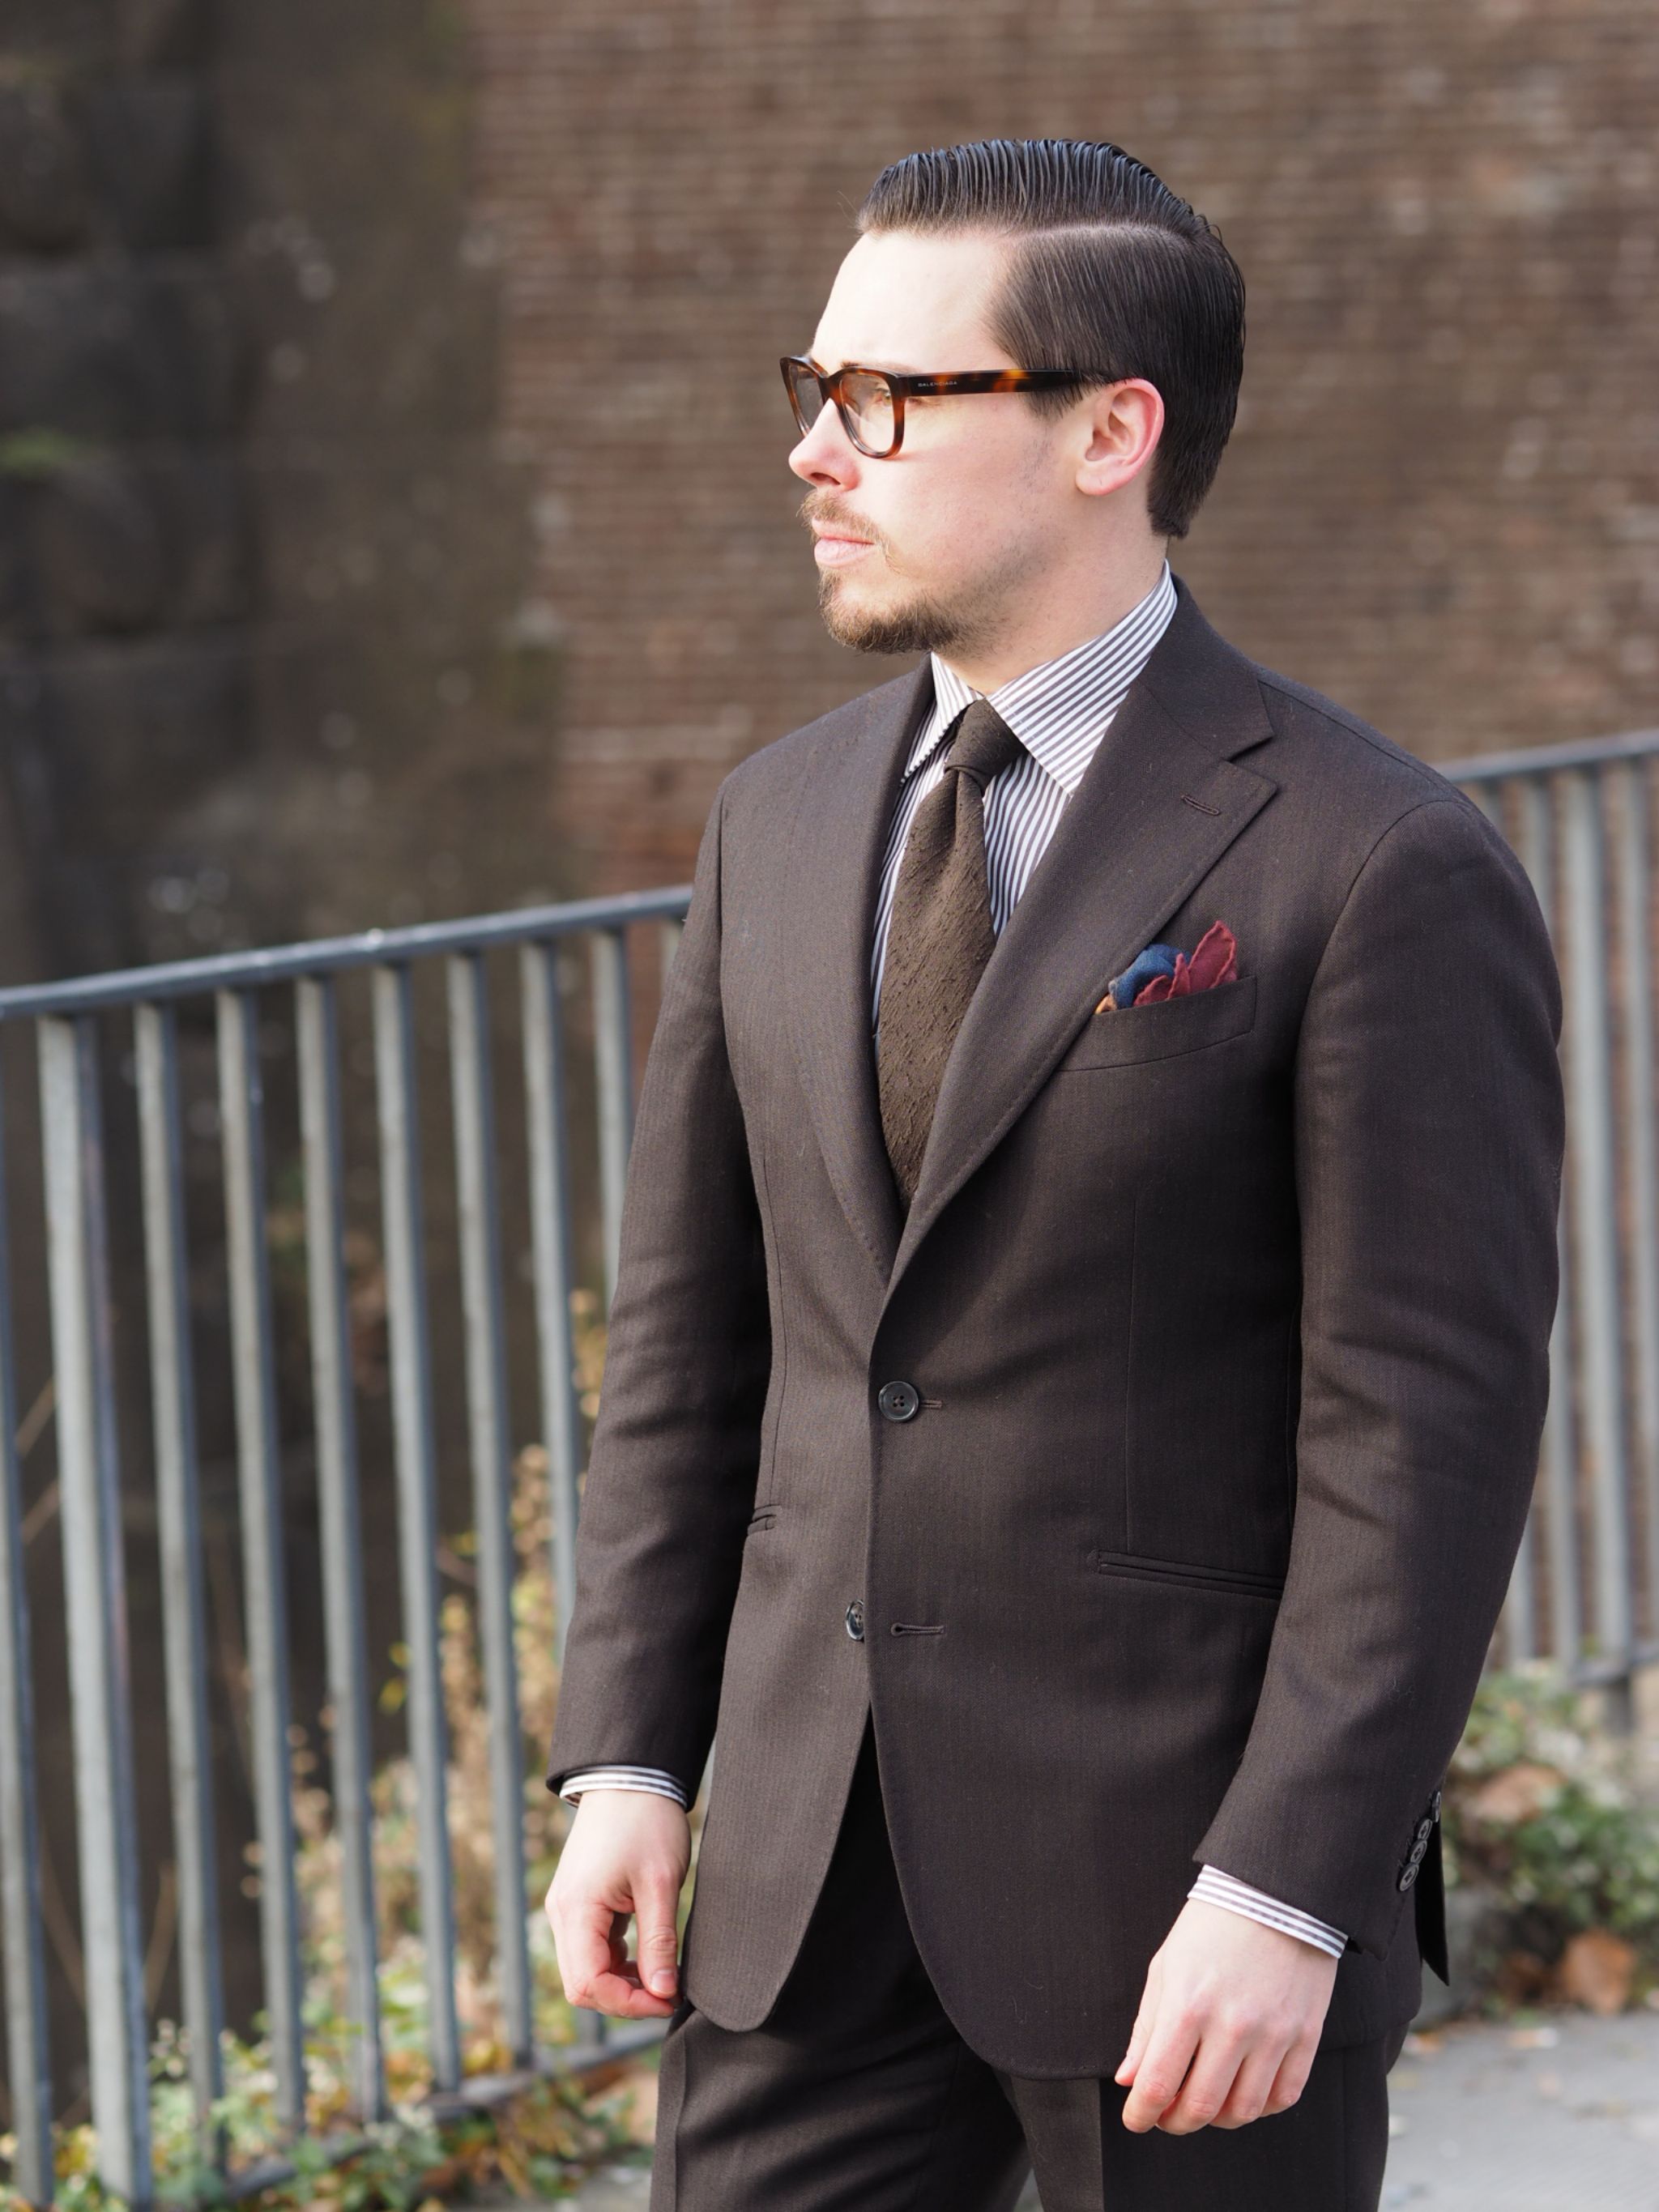 Pitti Uomo 91 DLA look book preview - brown wool suit with brown shantung silk tie and striped shirt